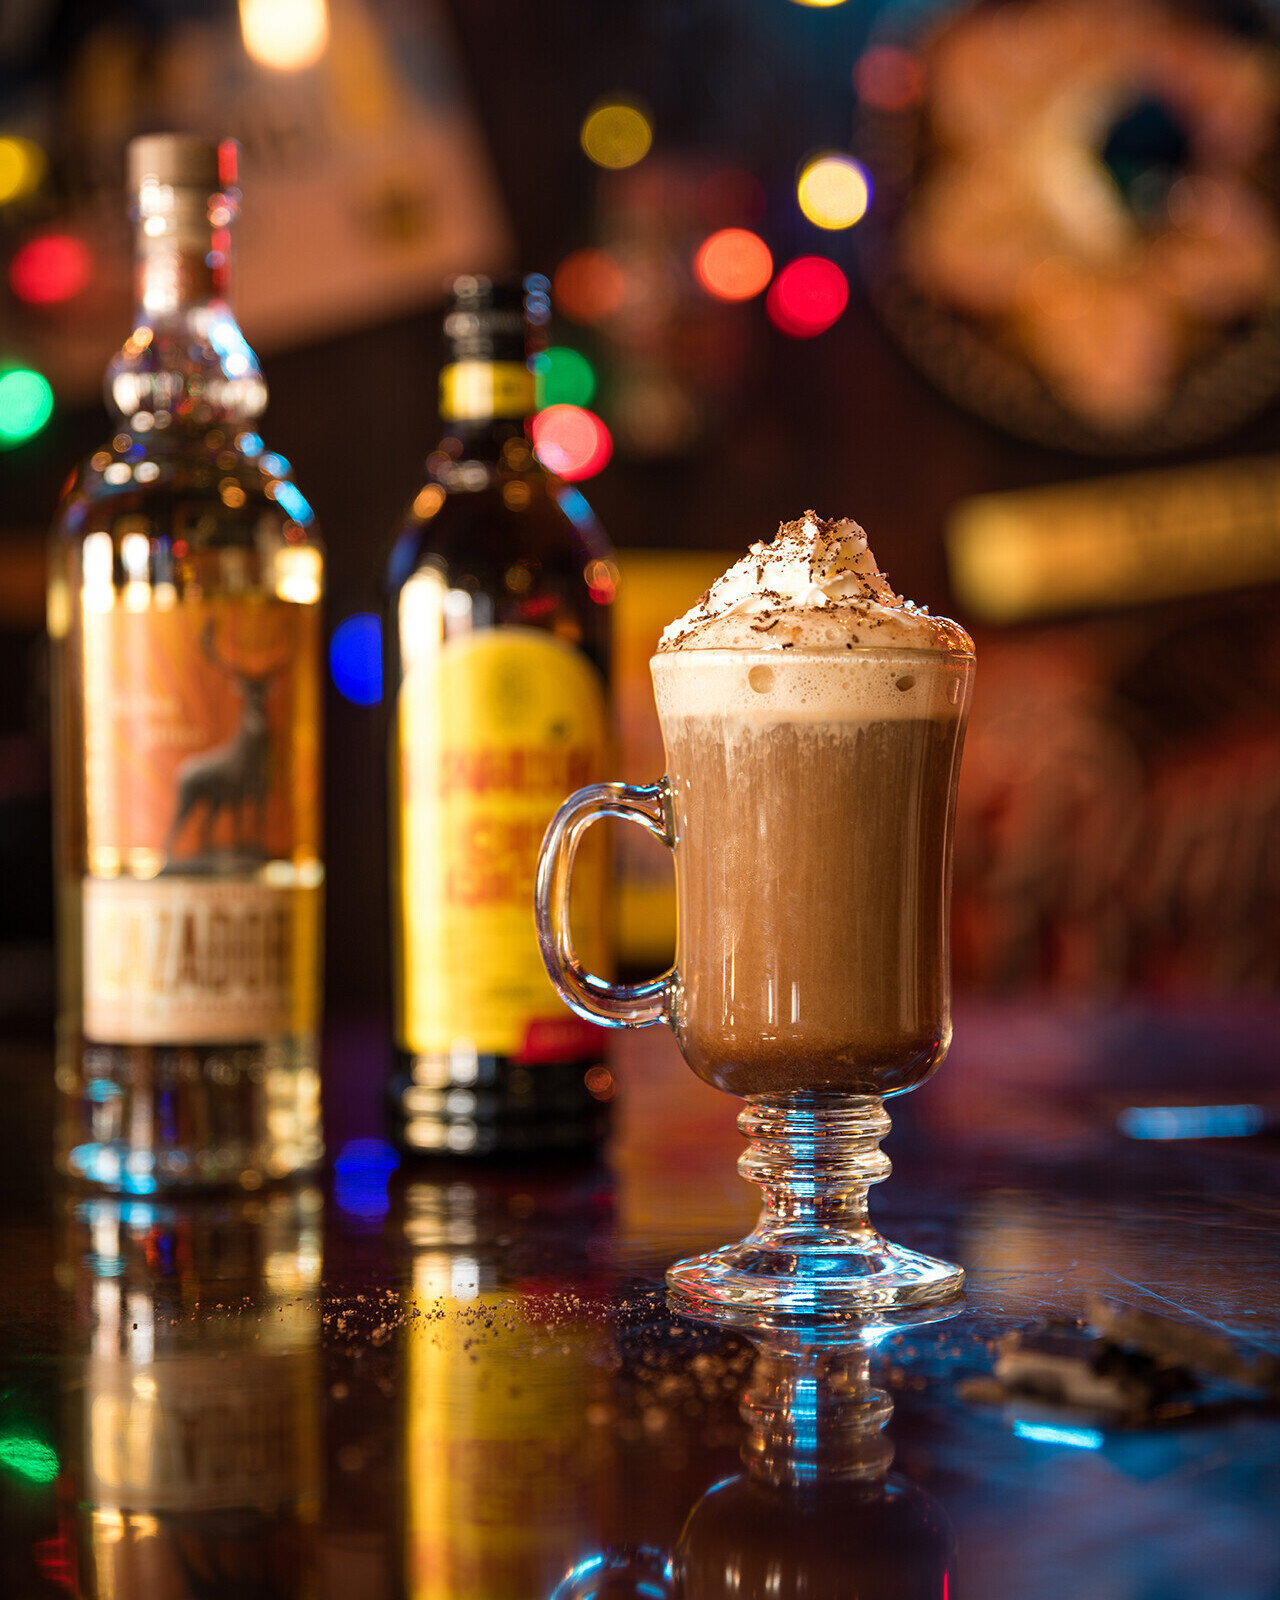 Stop by the Magpie on Banff&rsquo;s 2022 Hot Chocolate Trail!
Whether you&rsquo;re a kid at heart or are visiting Banff with kids of your own, sipping on a steaming cup of hot chocolate is a must this Christmas season! Stop by anytime before January 